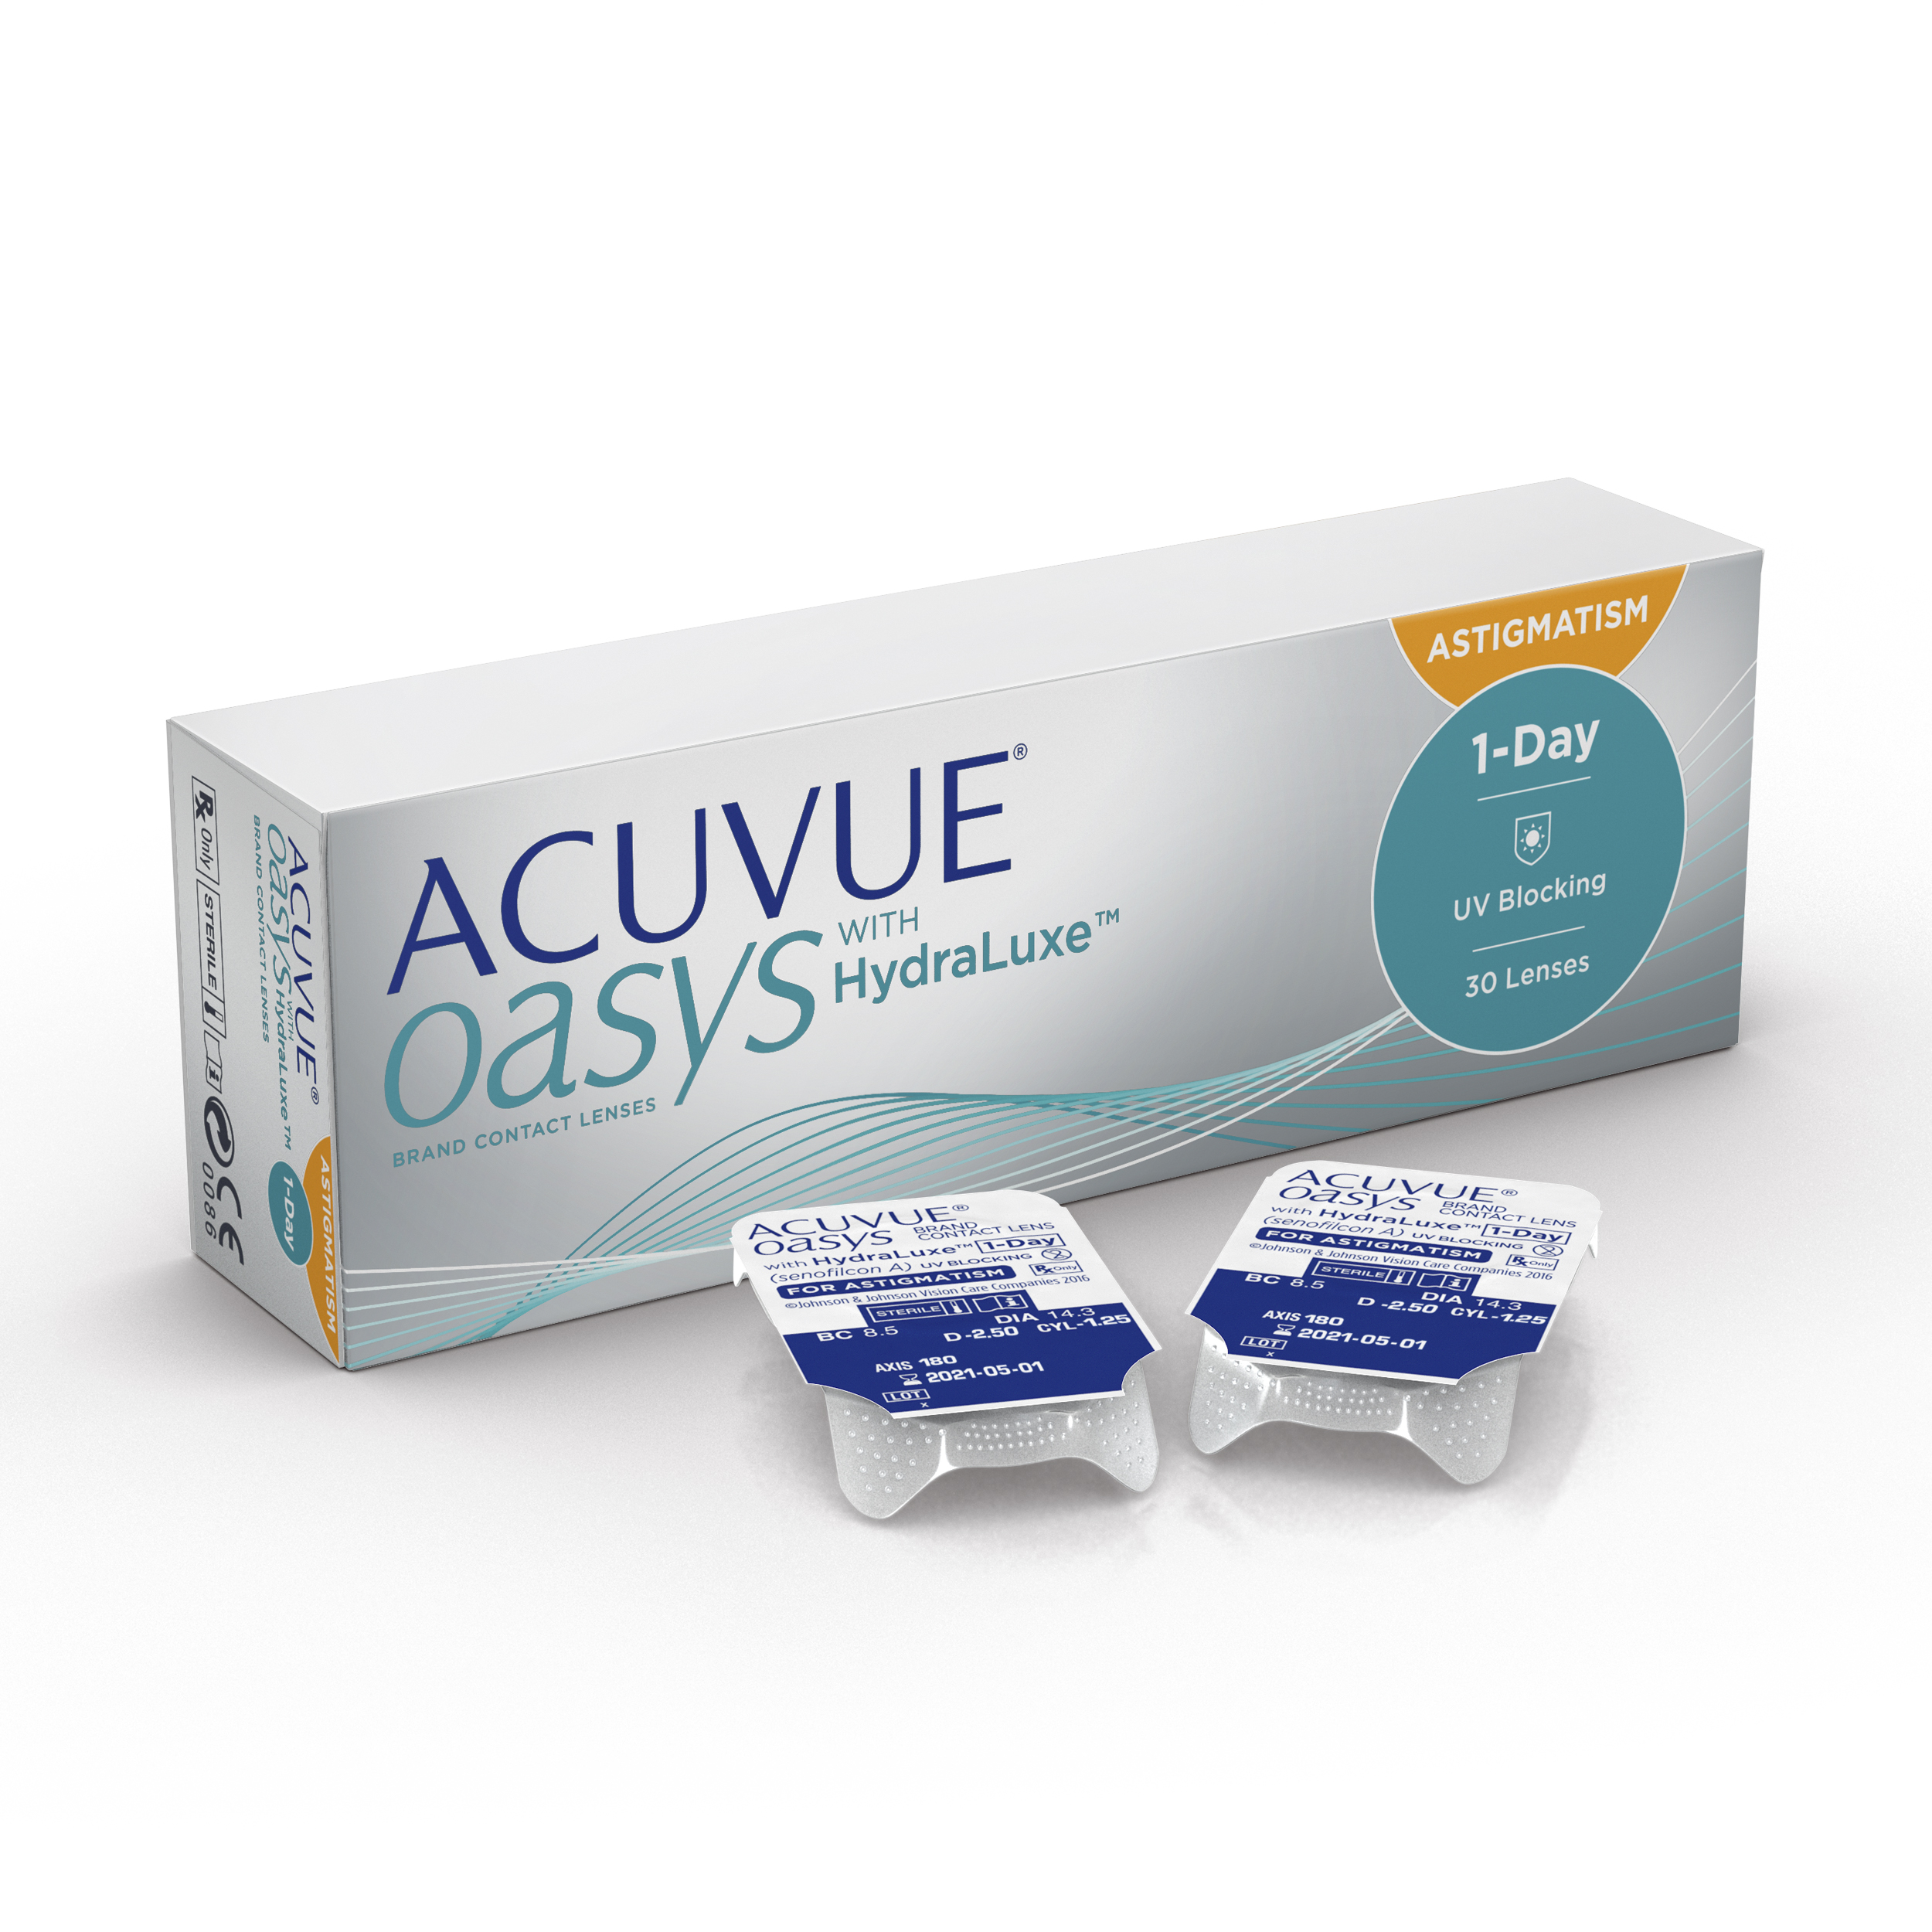 Do Acuvue Oasys Contacts Expire